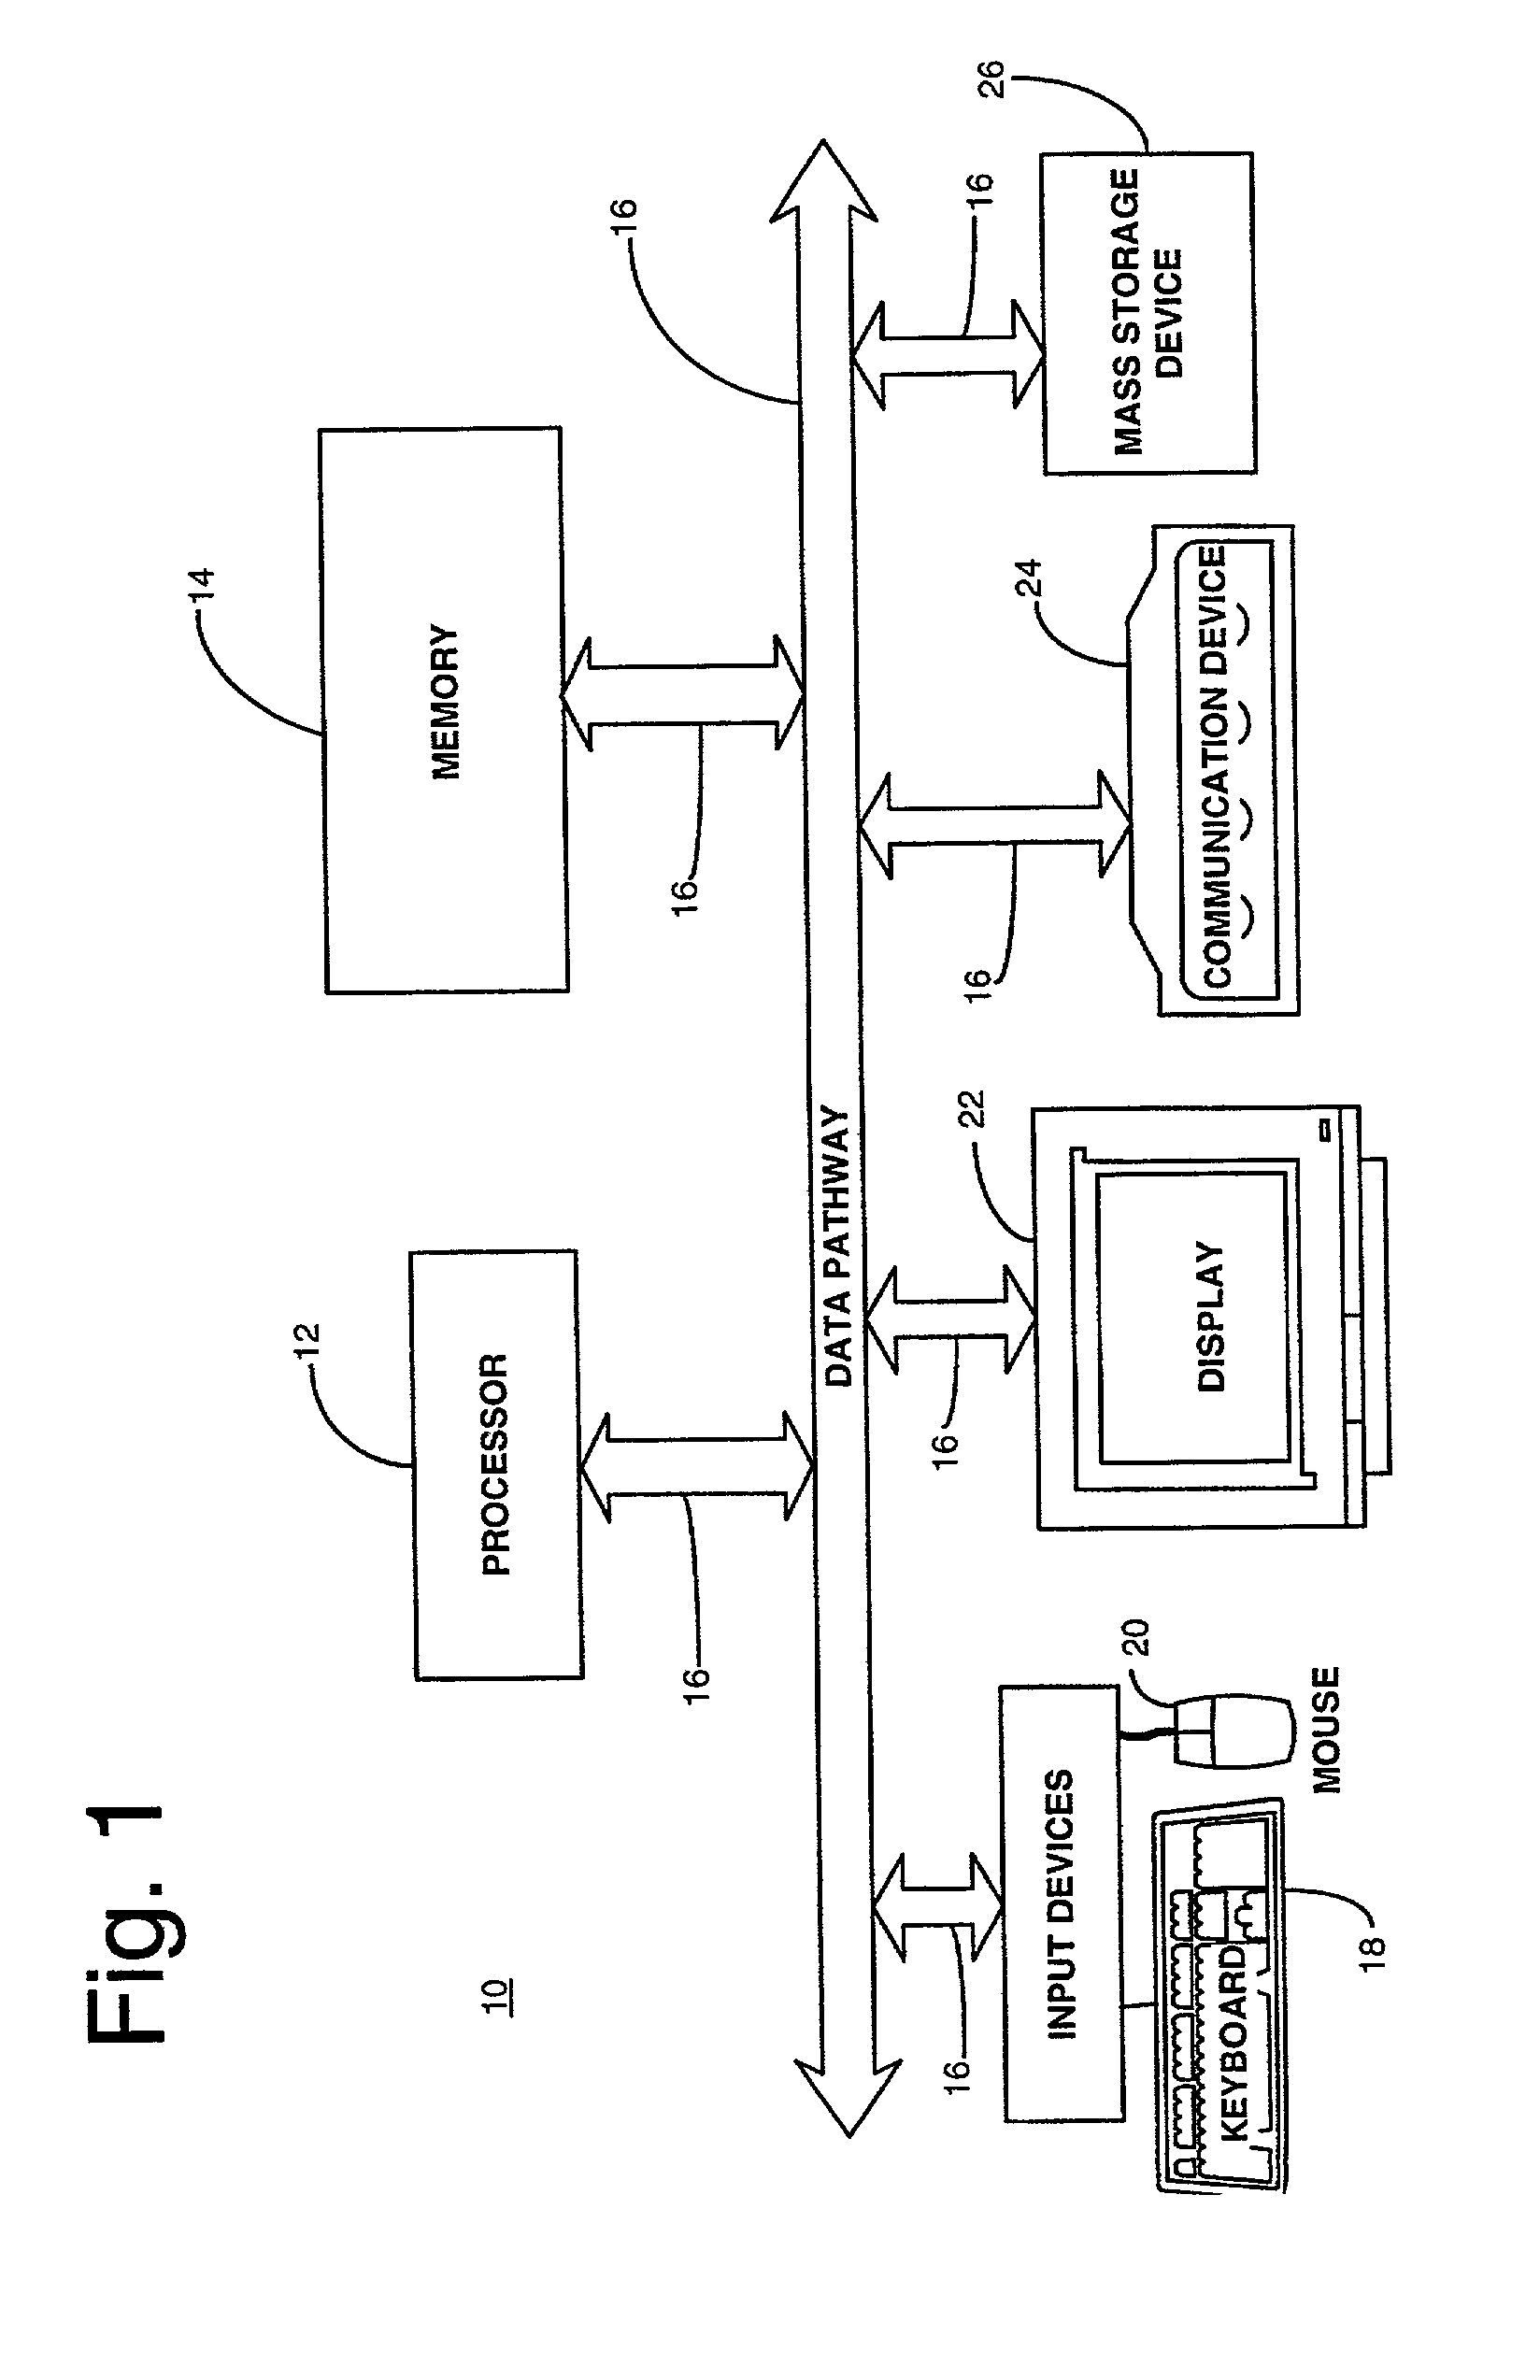 System, method and computer product for incremental improvement of algorithm performance during algorithm development